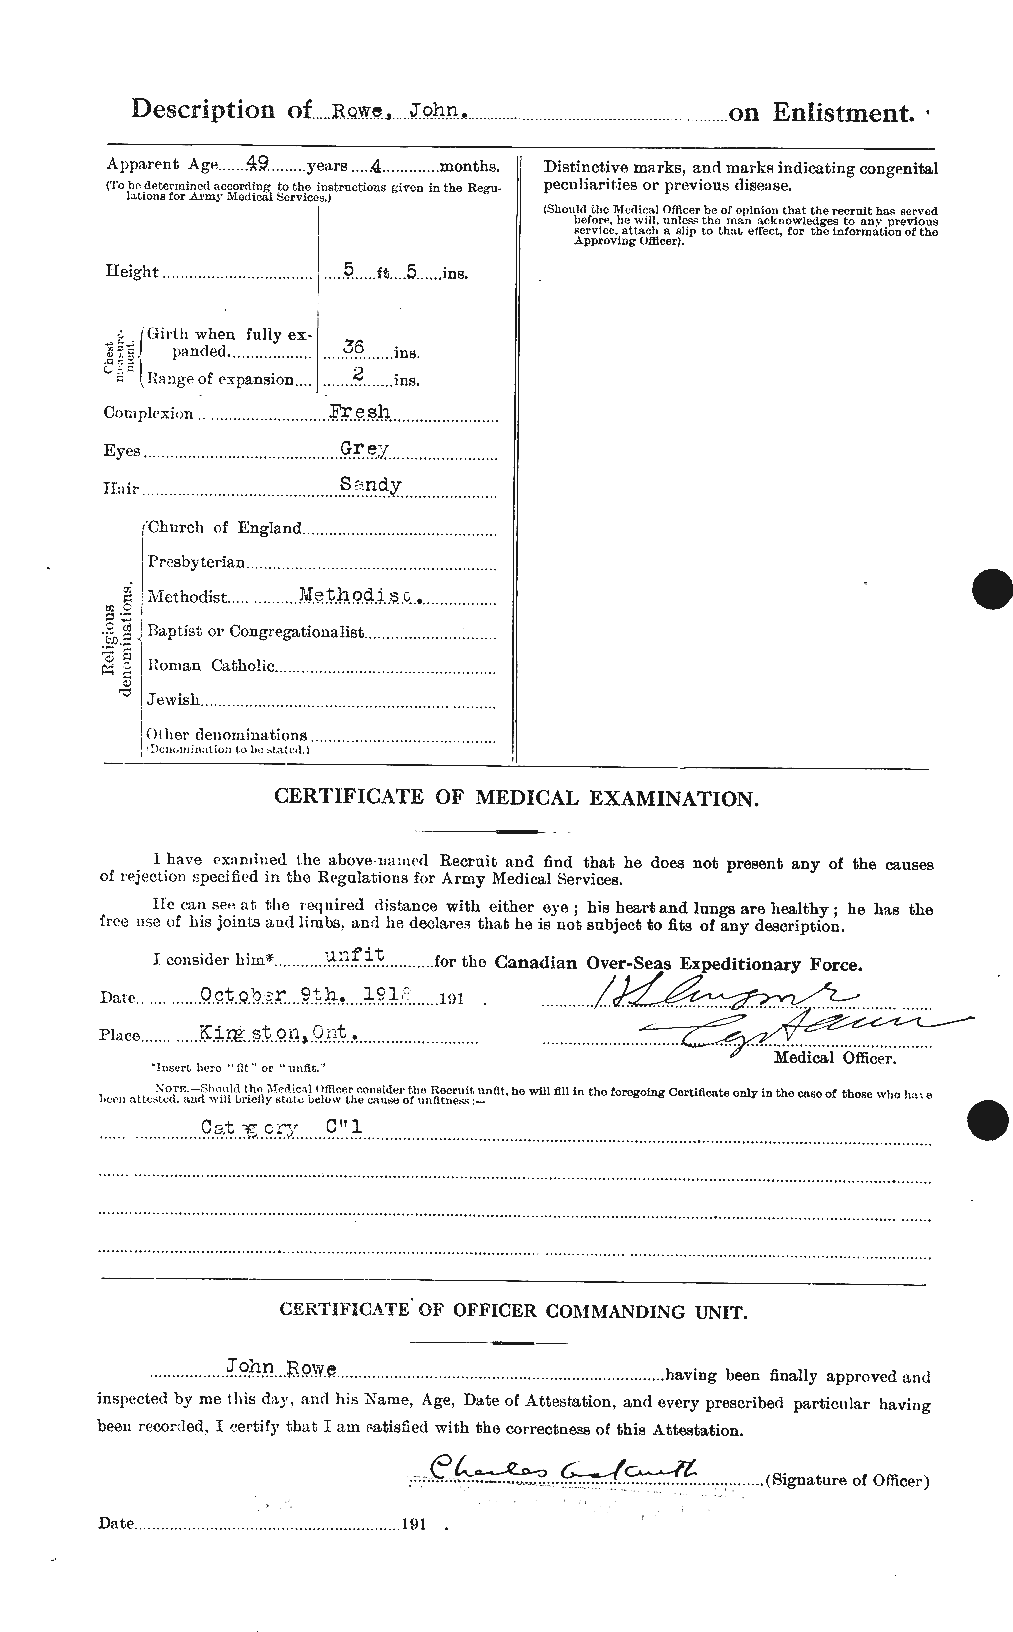 Personnel Records of the First World War - CEF 615924b